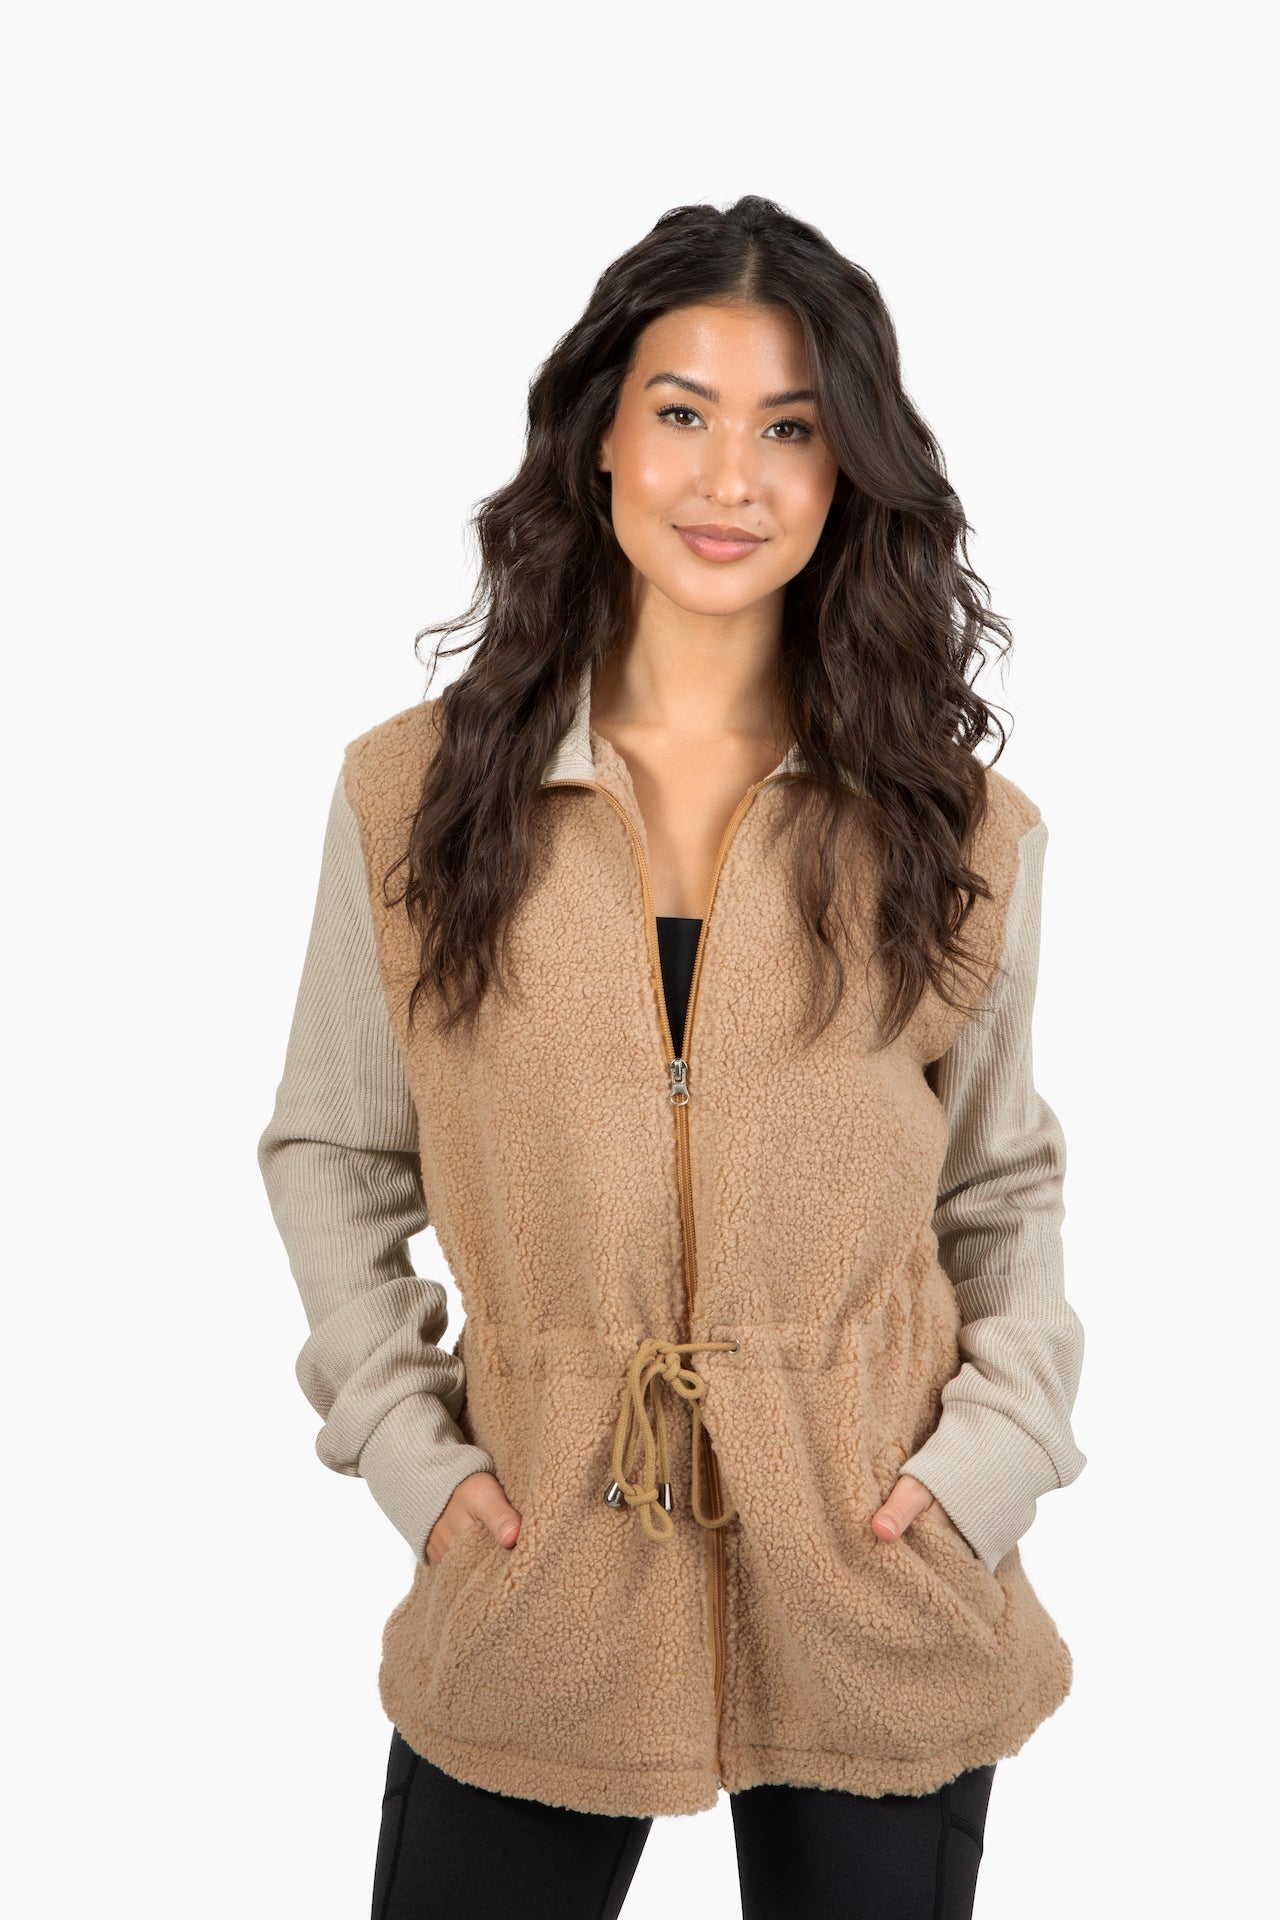 The Gabs Mixed Material Sherpa- Beige by Urban Luxe Lifestyles